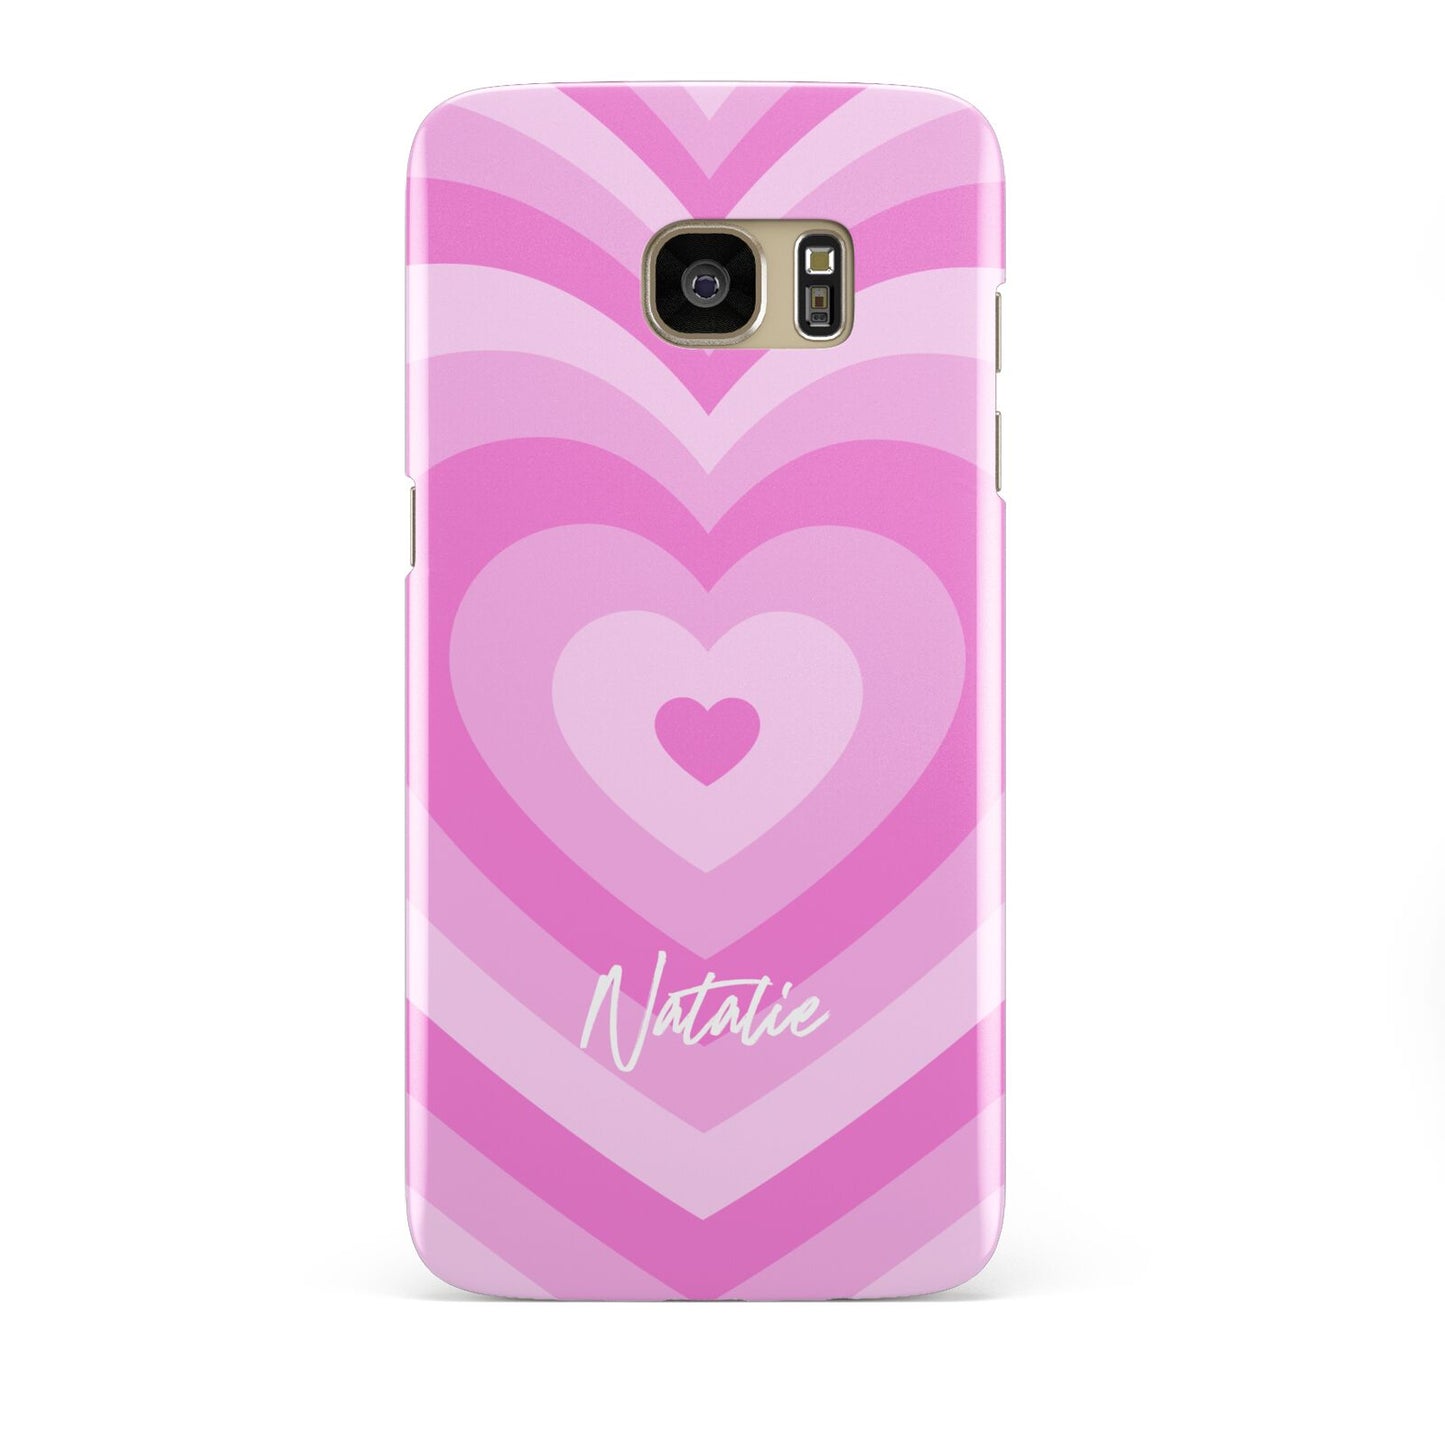 Personalised Pink Heart Samsung Galaxy S7 Edge Case